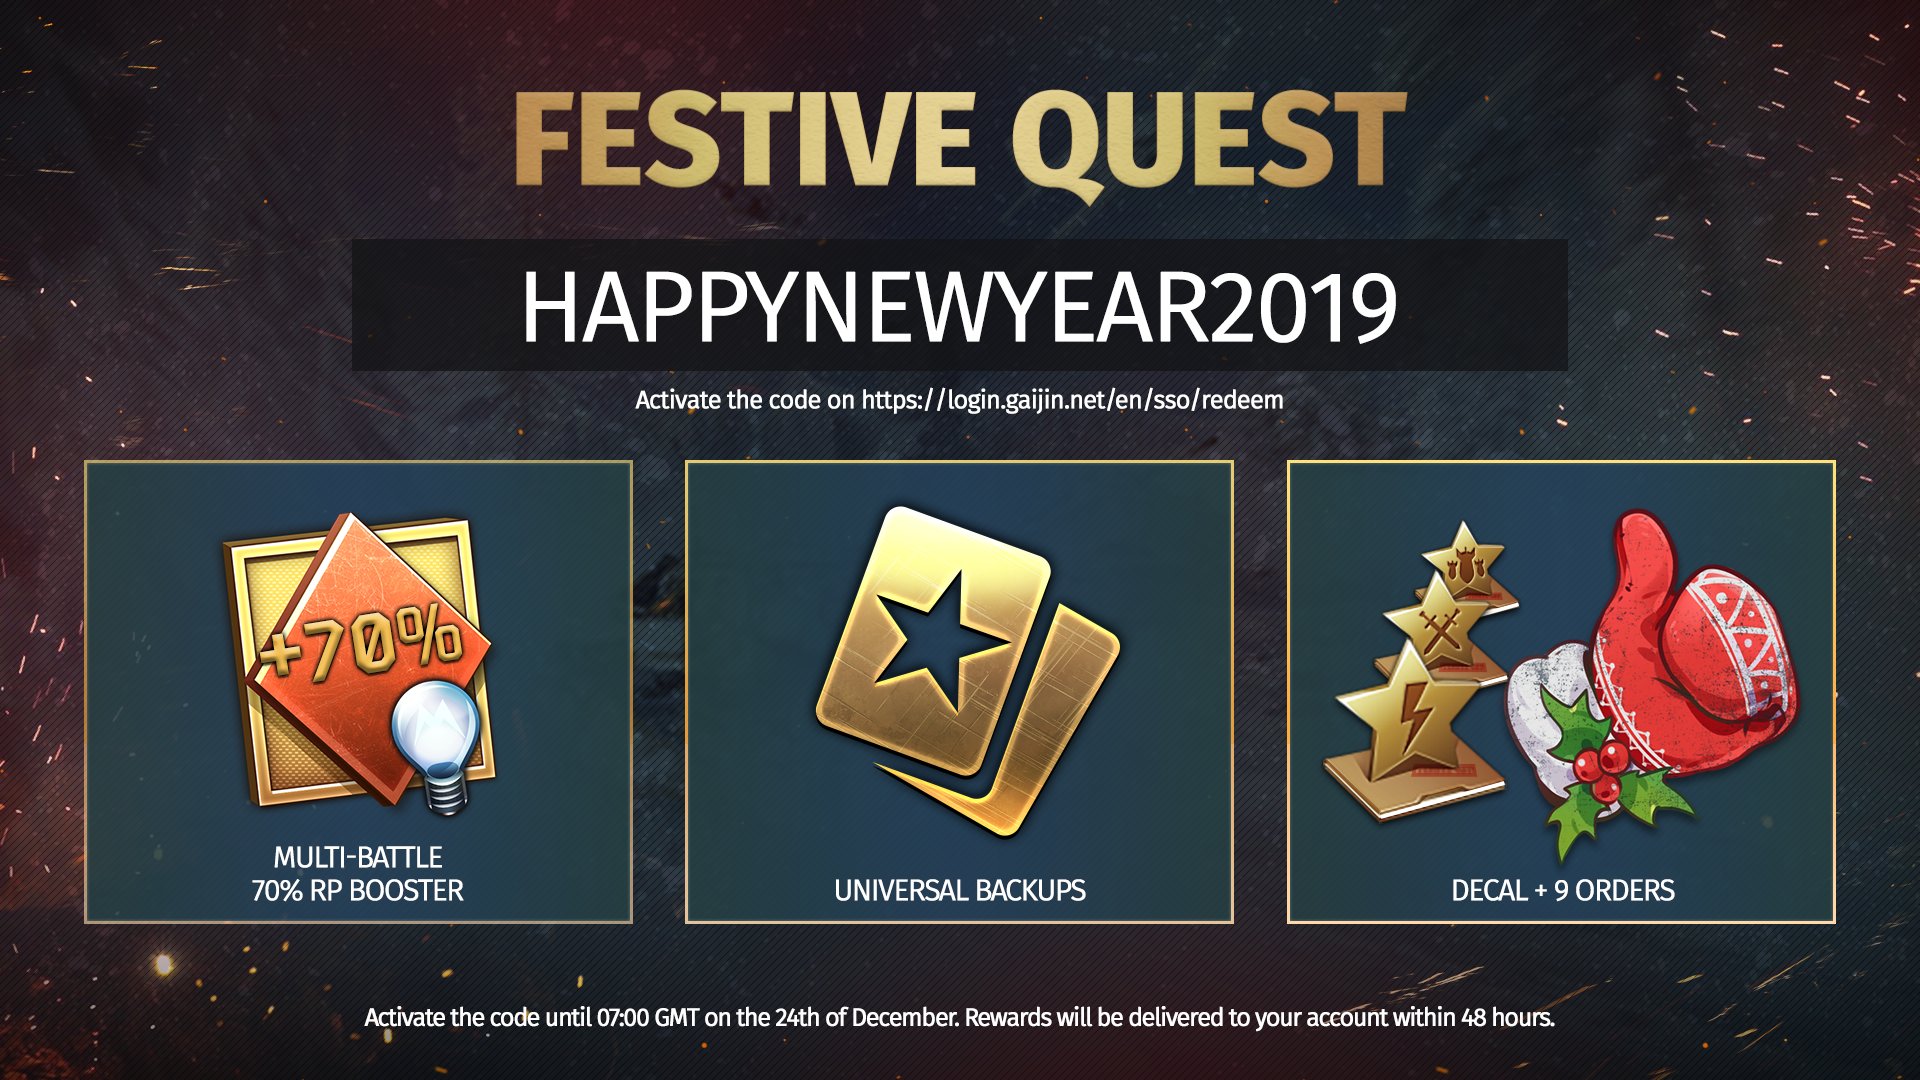 War Thunder בטוויטר Good Work You Have Shown An Extraordinary Support You Deserve A Christmas Present Activate The Code Happynewyear19 In Our Store Till 07 00 Gmt On The 24th Of December